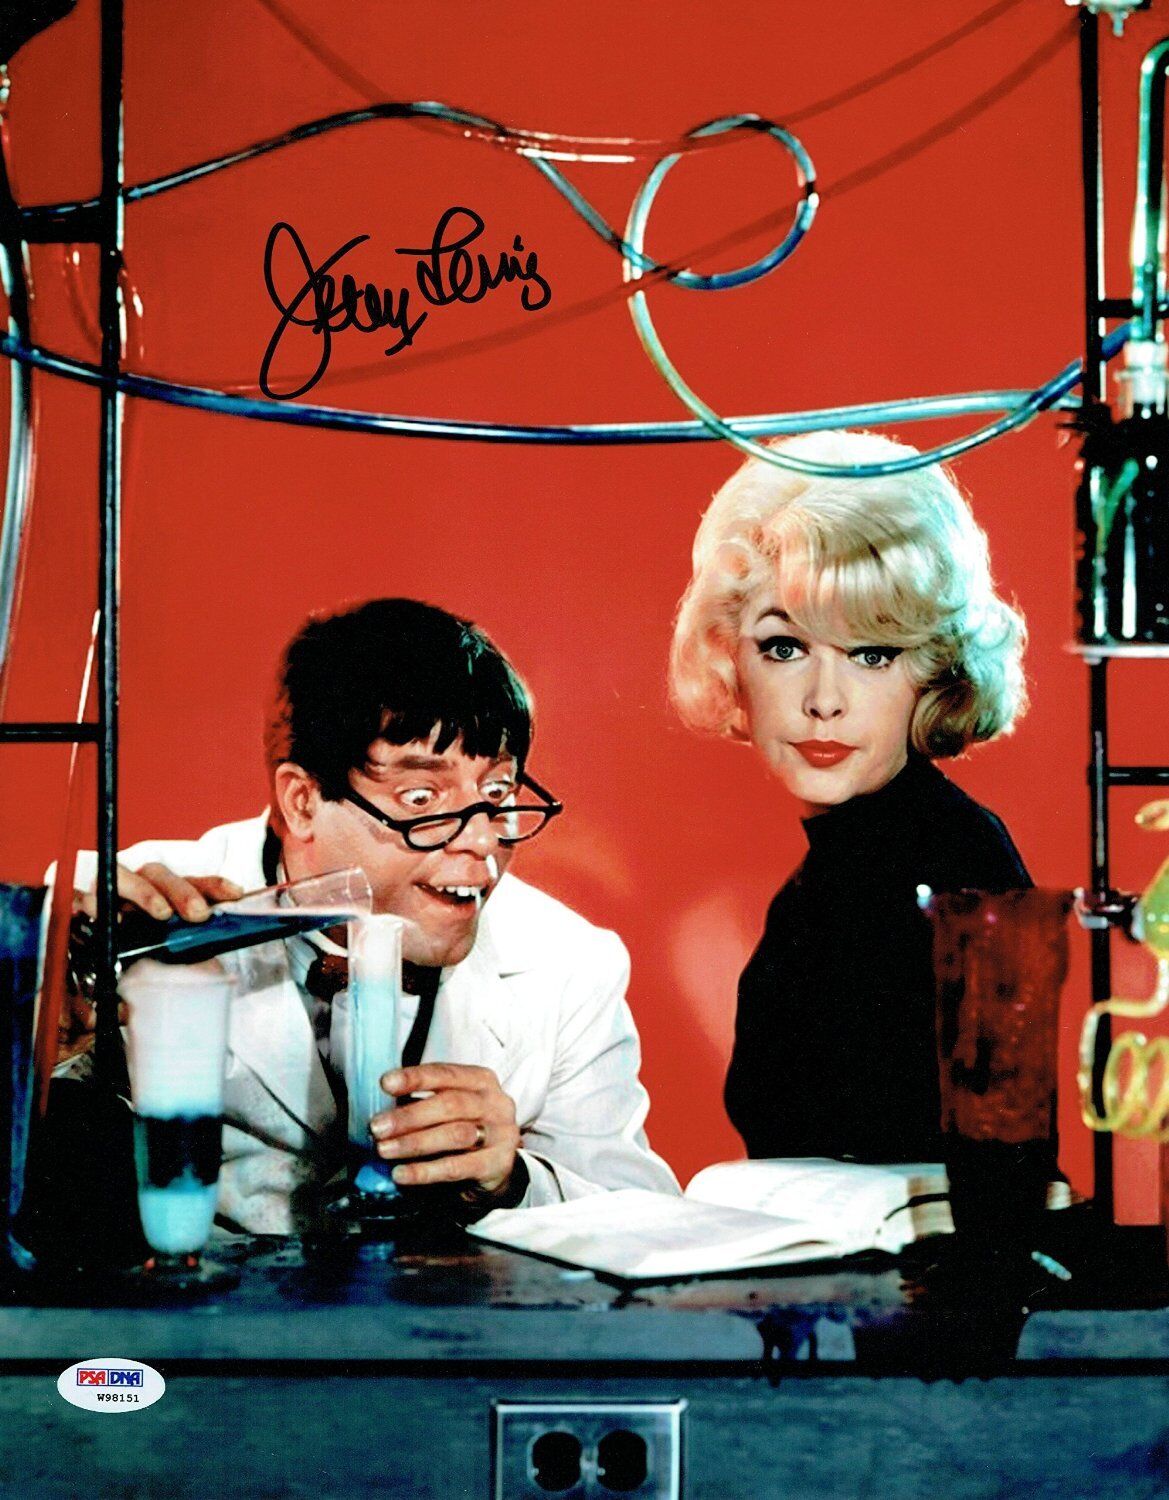 Jerry Lewis Signed Nutty Professor Authentic Autographed 11x14 Photo Poster painting PSA/DNA #3